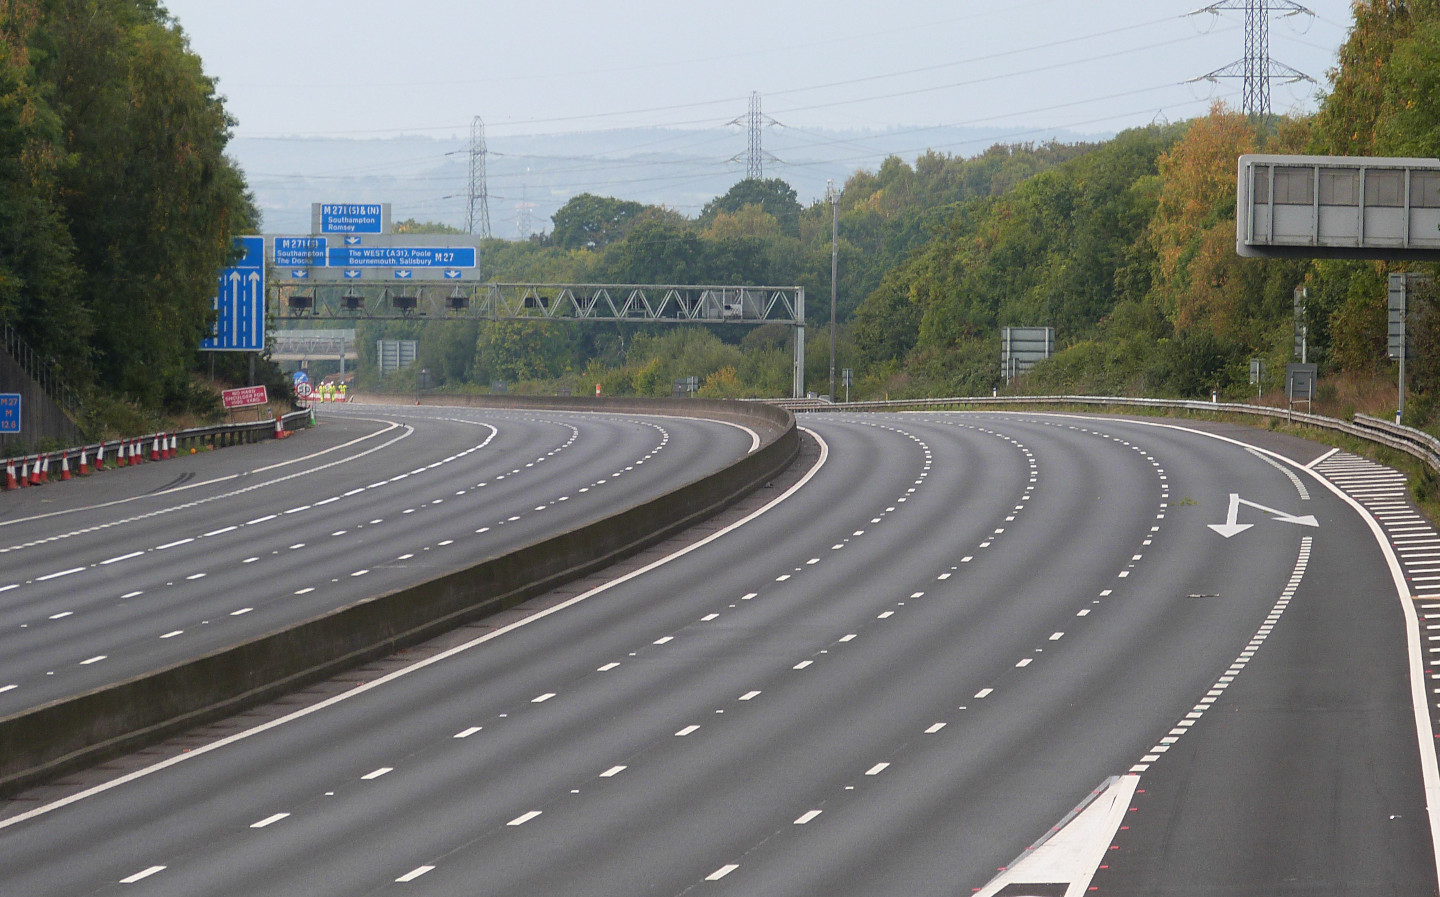 No new smart motorways to open without stopped vehicle detection system installed